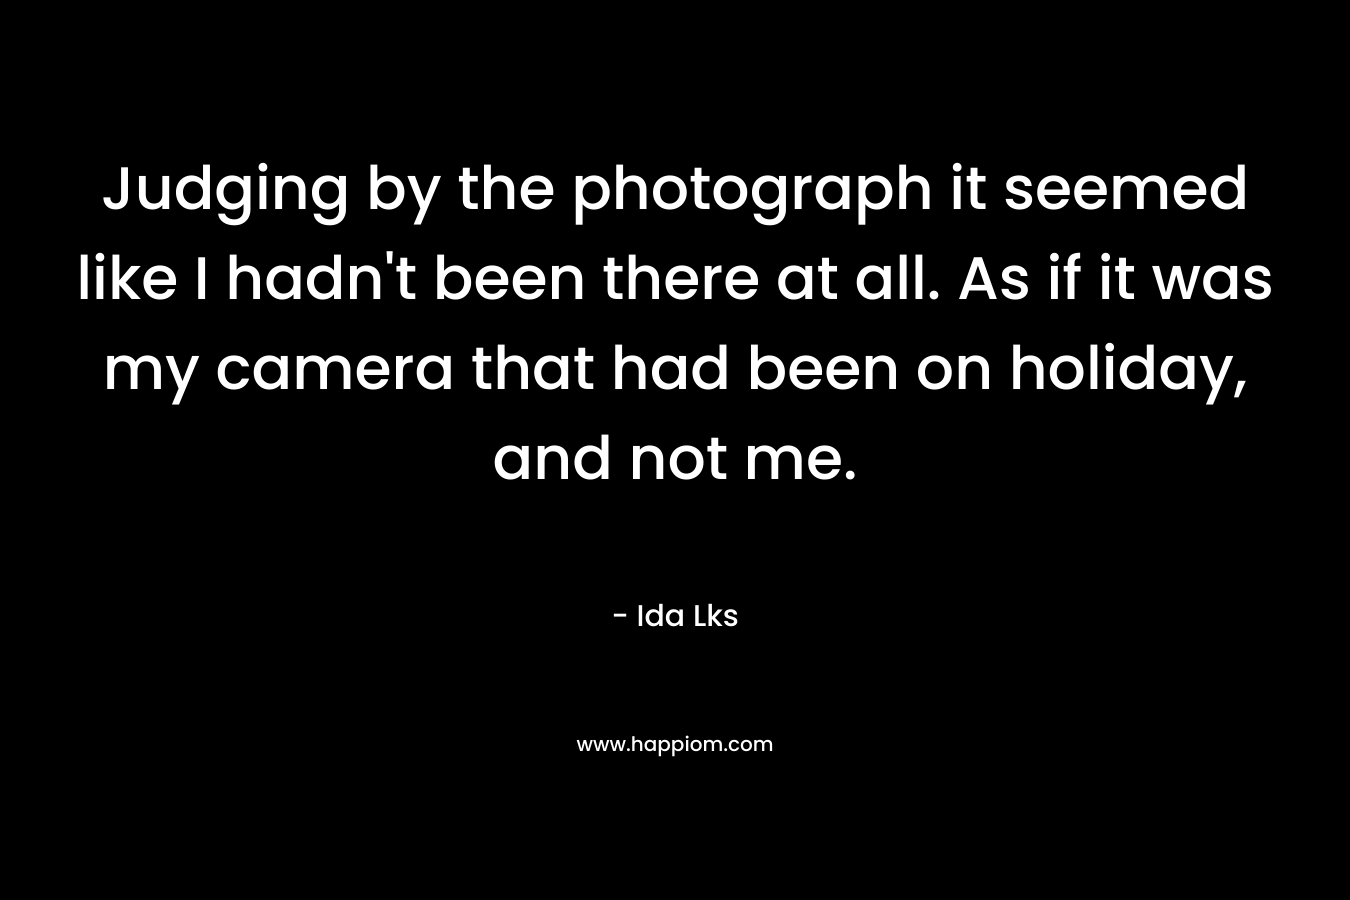 Judging by the photograph it seemed like I hadn’t been there at all. As if it was my camera that had been on holiday, and not me. – Ida Lks